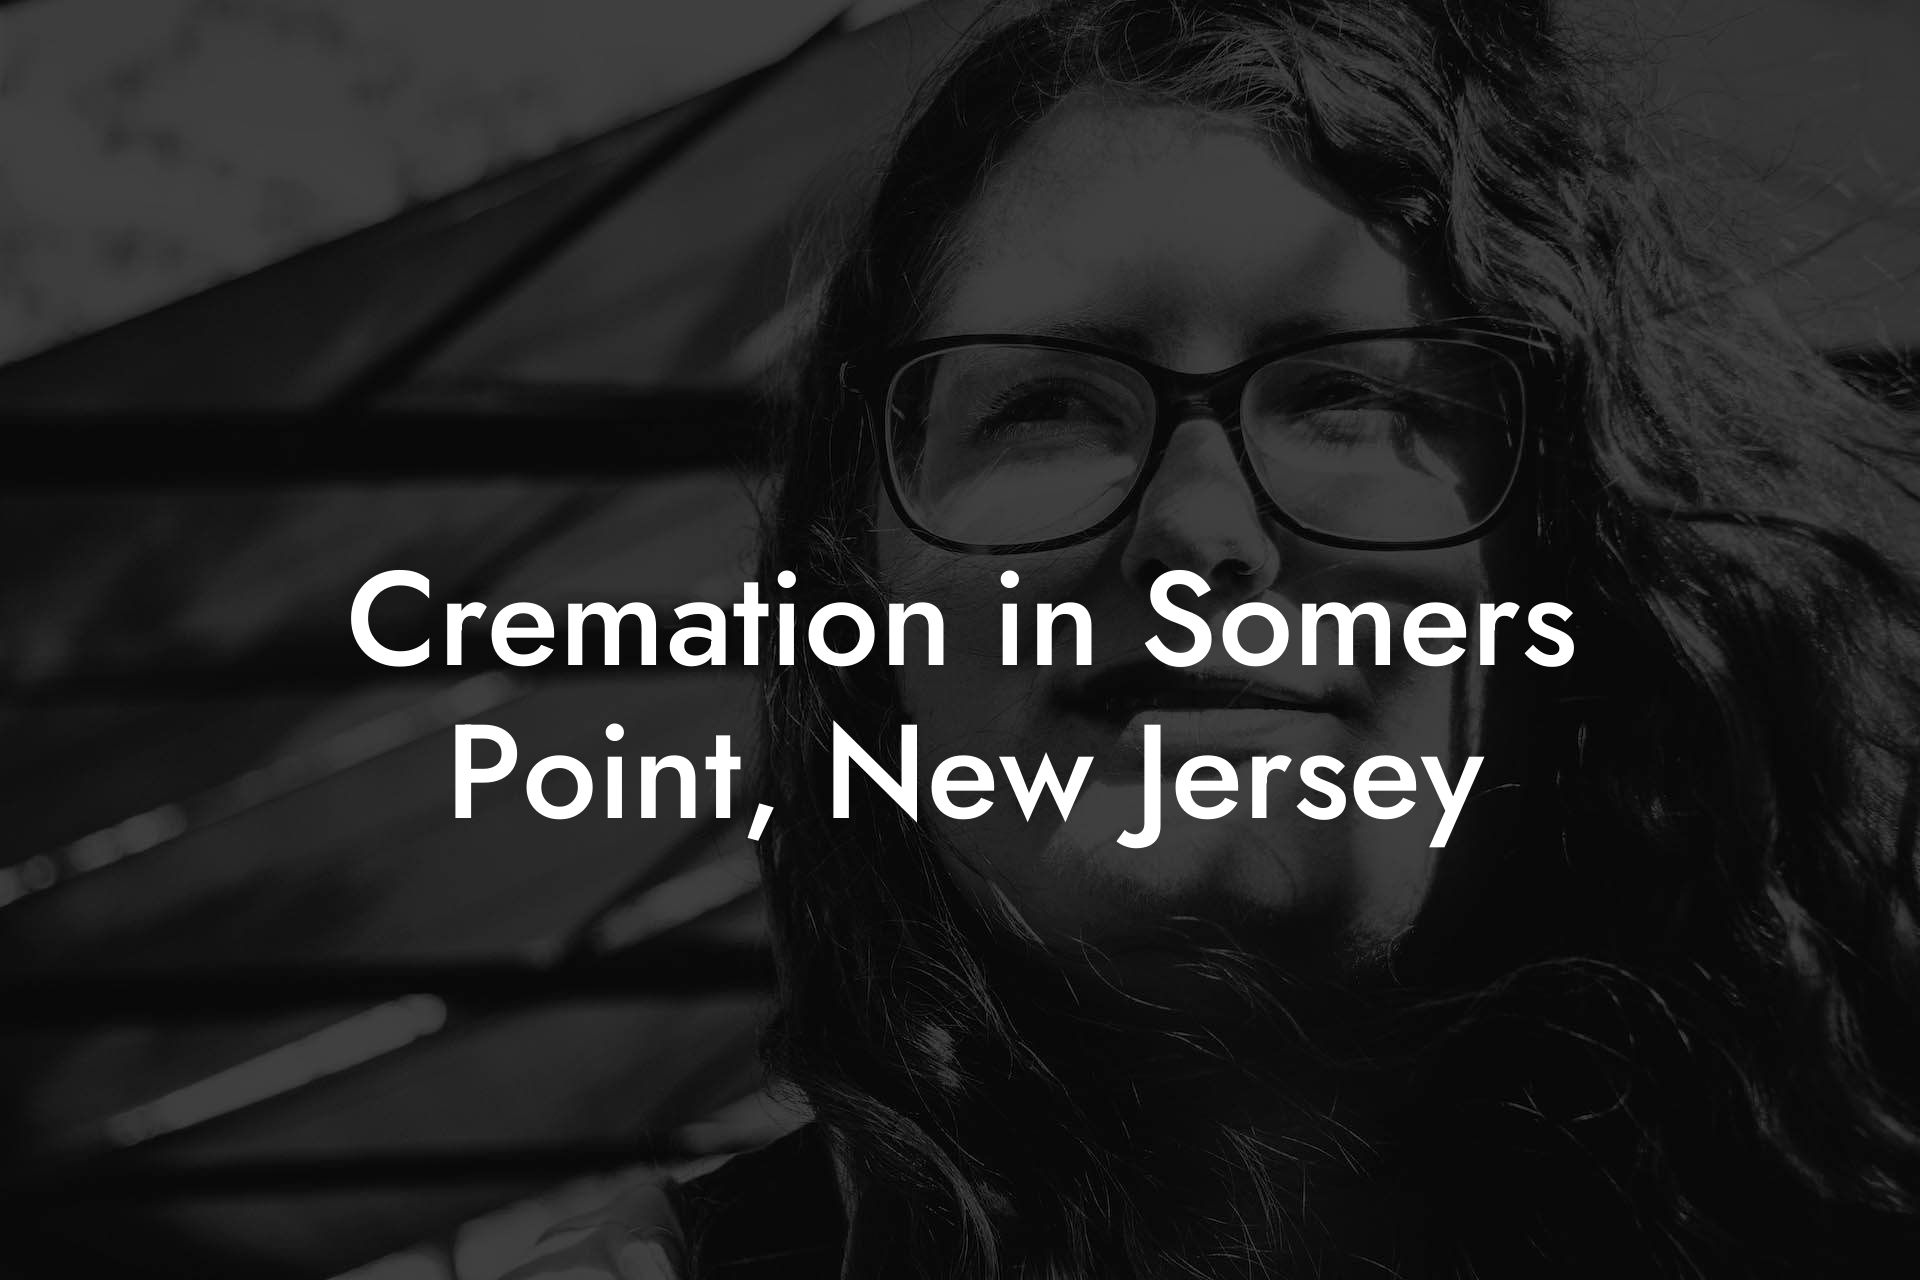 Cremation in Somers Point, New Jersey